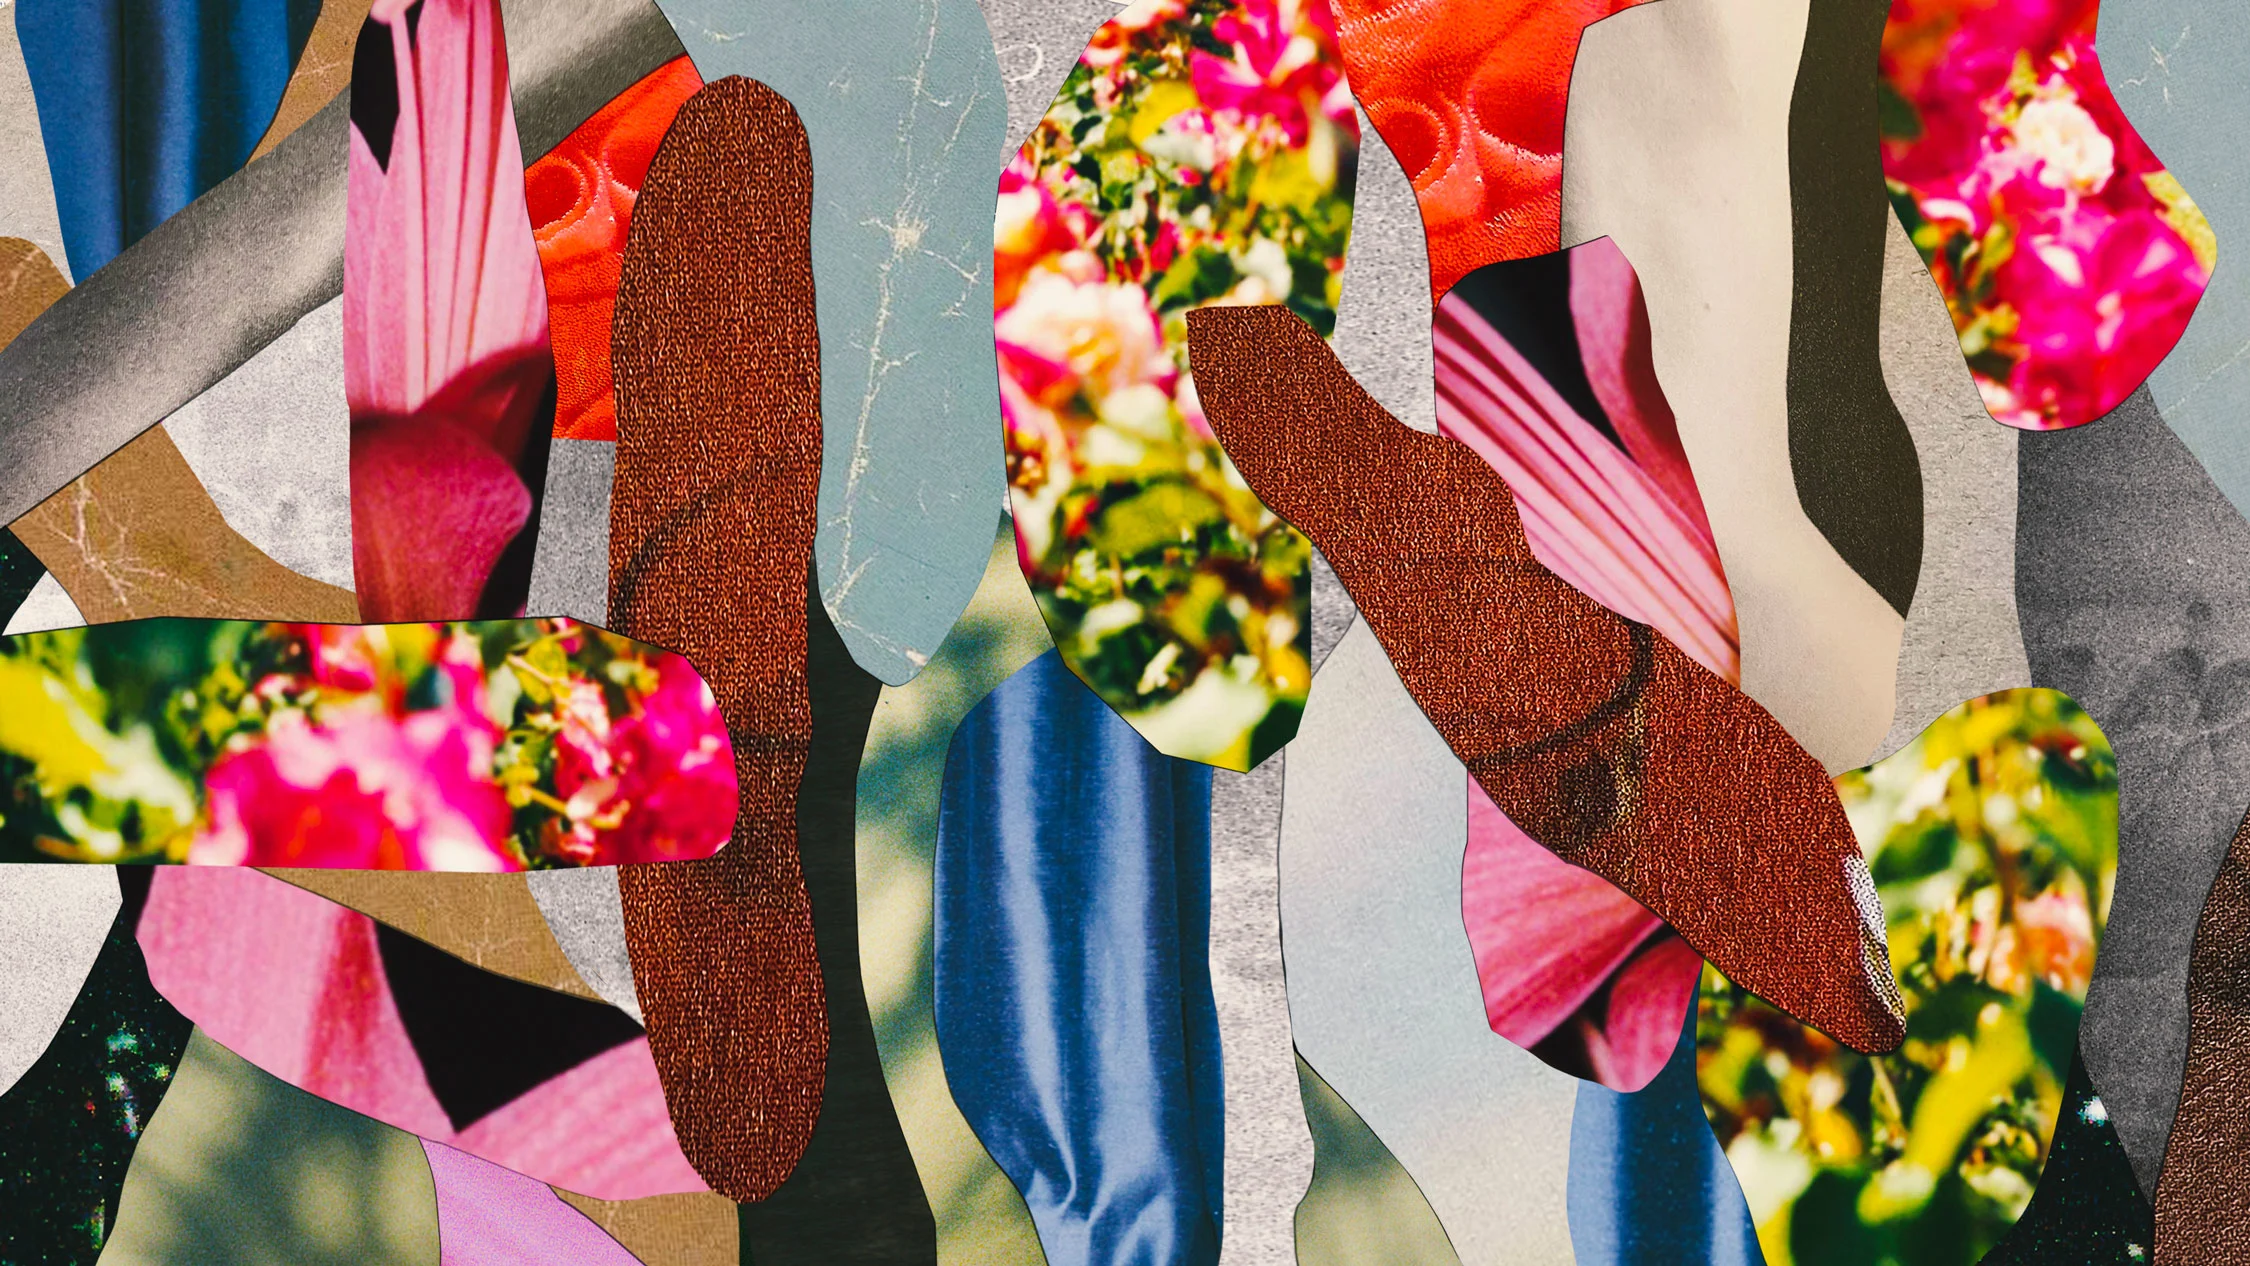 Collages by Alia Wilhelm